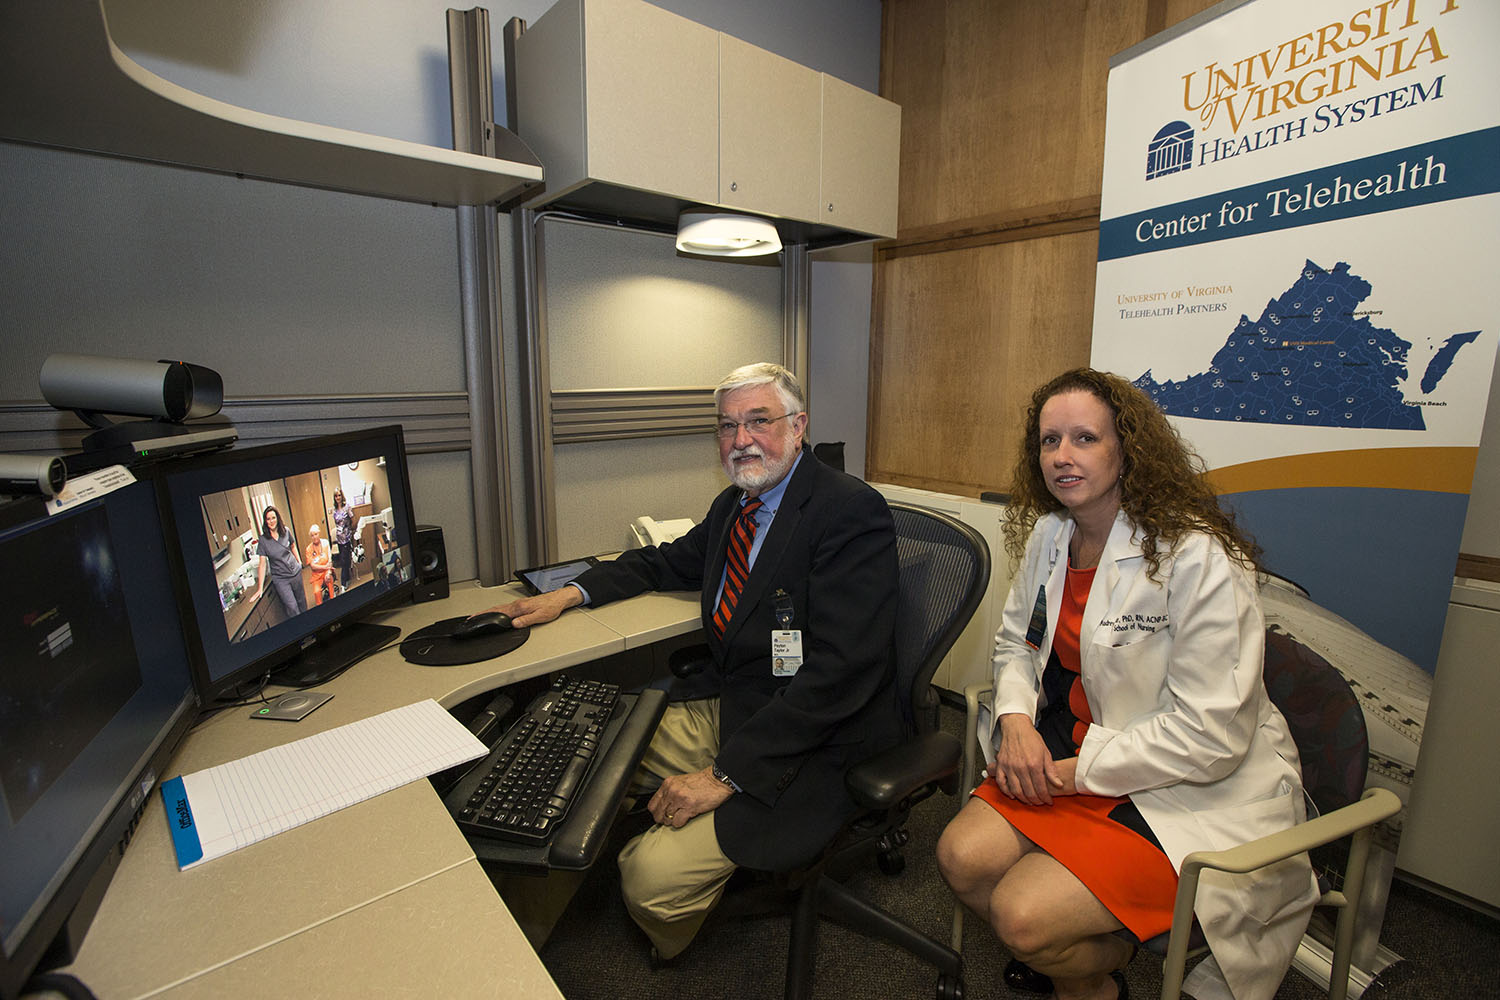 Dr. Peyton Taylor, left, and Audrey Snyder, right, smile at the camera from a desk